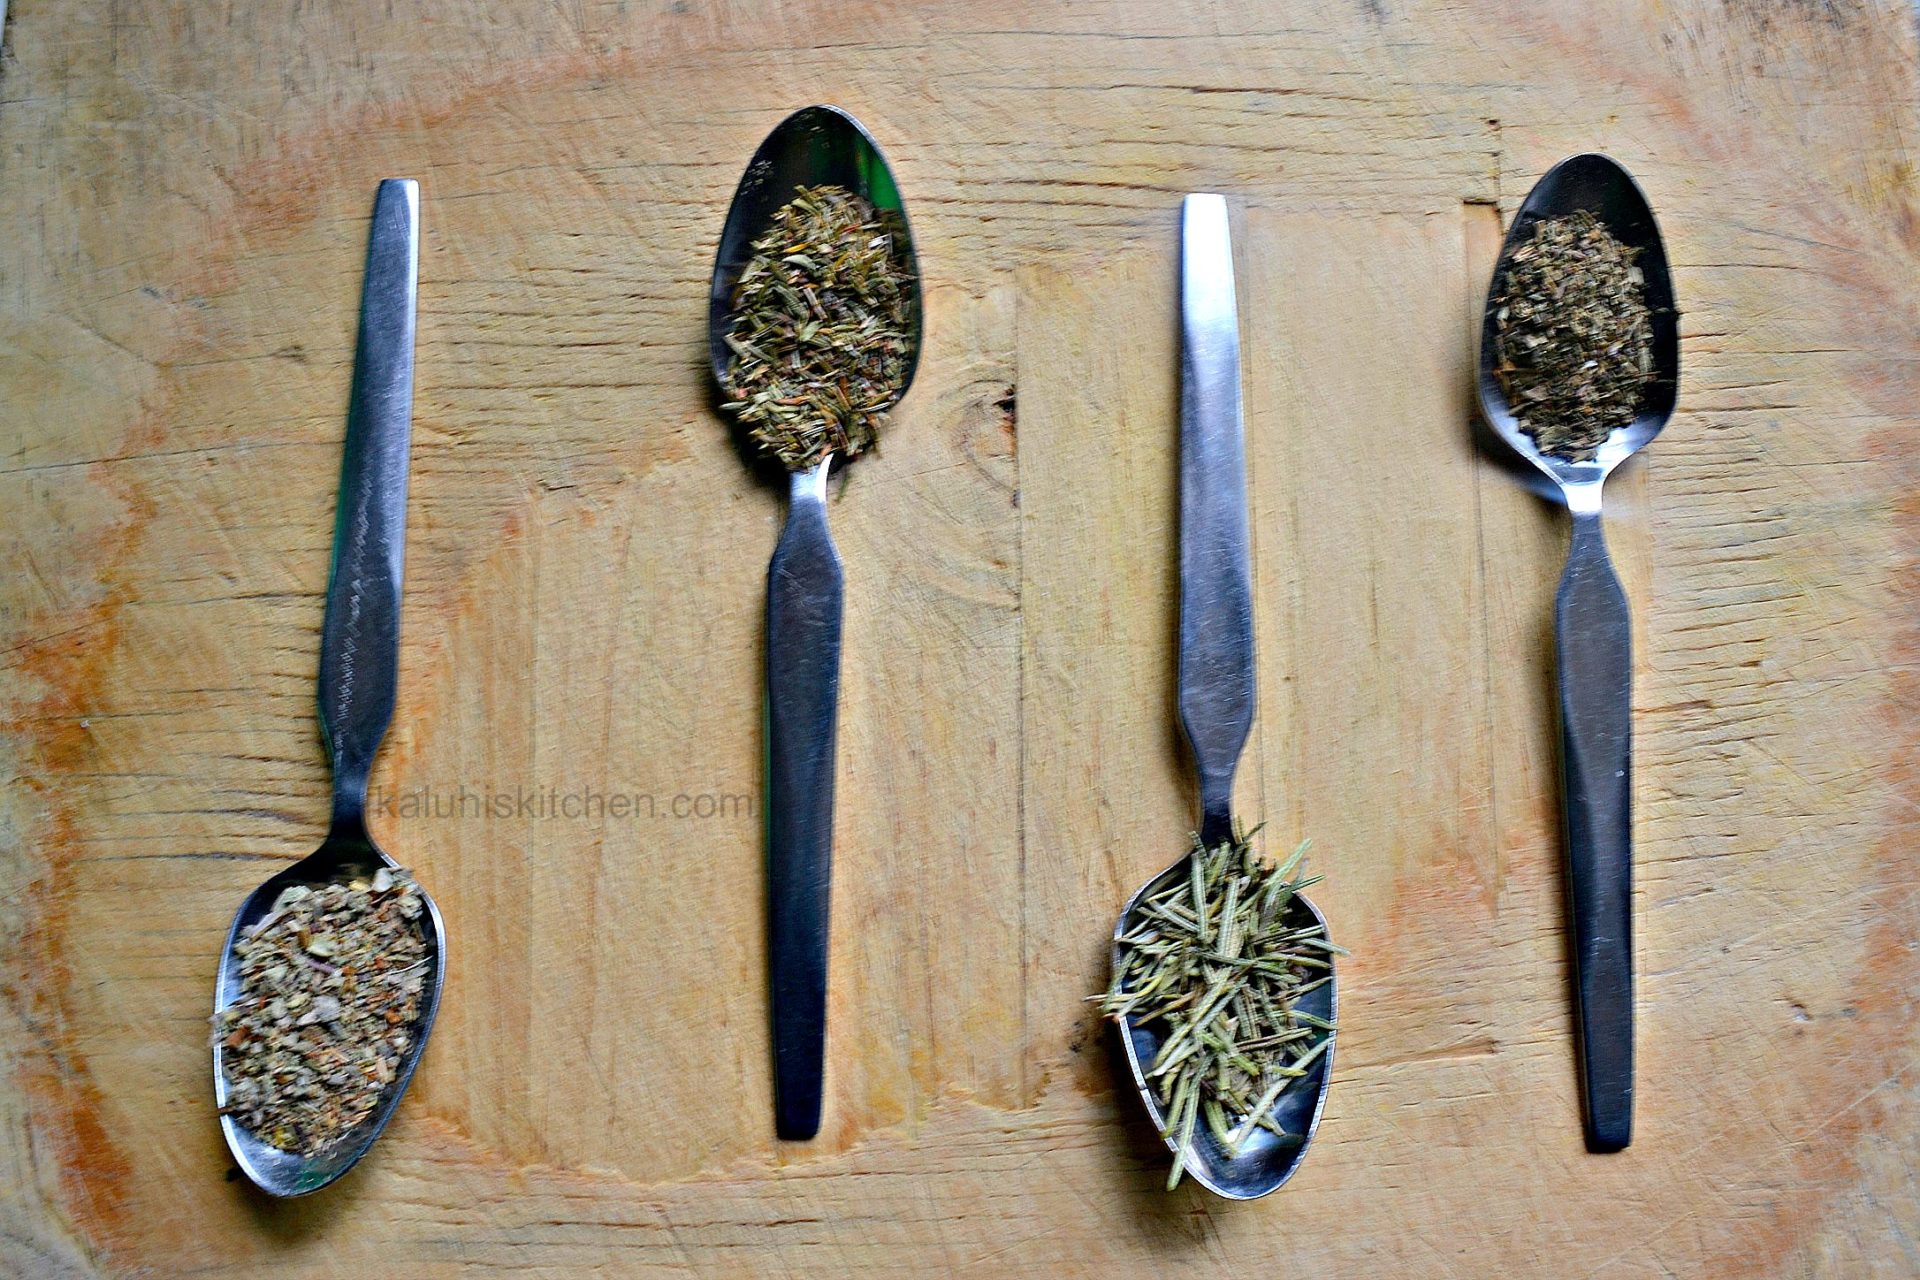 dried spices are more concentrated inflavor as compared to their fresh conter parts. They should hence be used in moderation_kaluhiskitchen.com_L-R sage, thyme, rosemary, basil